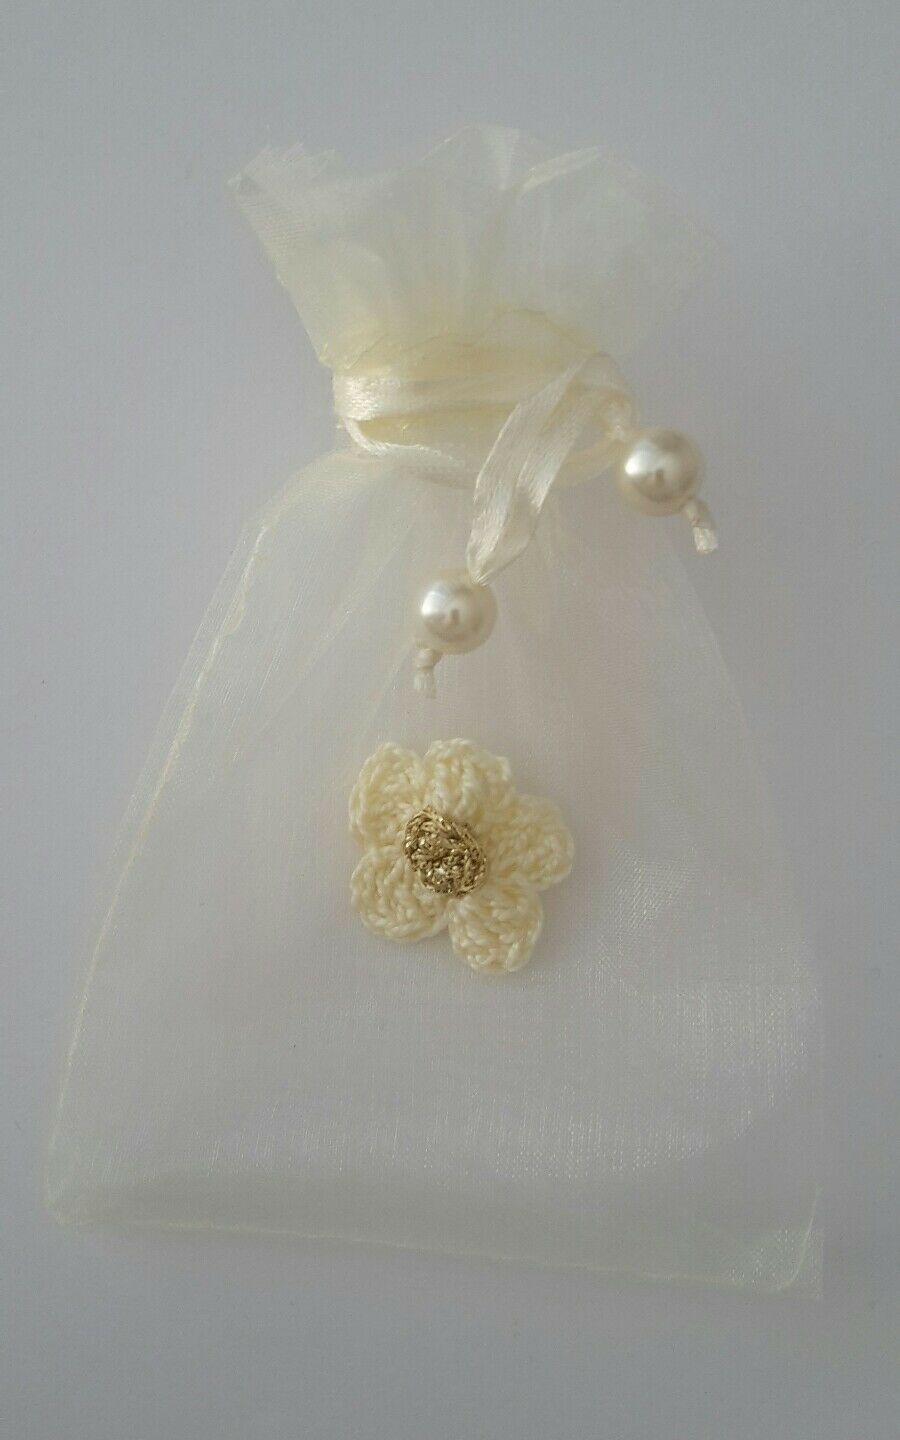 12x Cream wedding favour bags- Gifts bags- Bridal shower- Christening favour bag